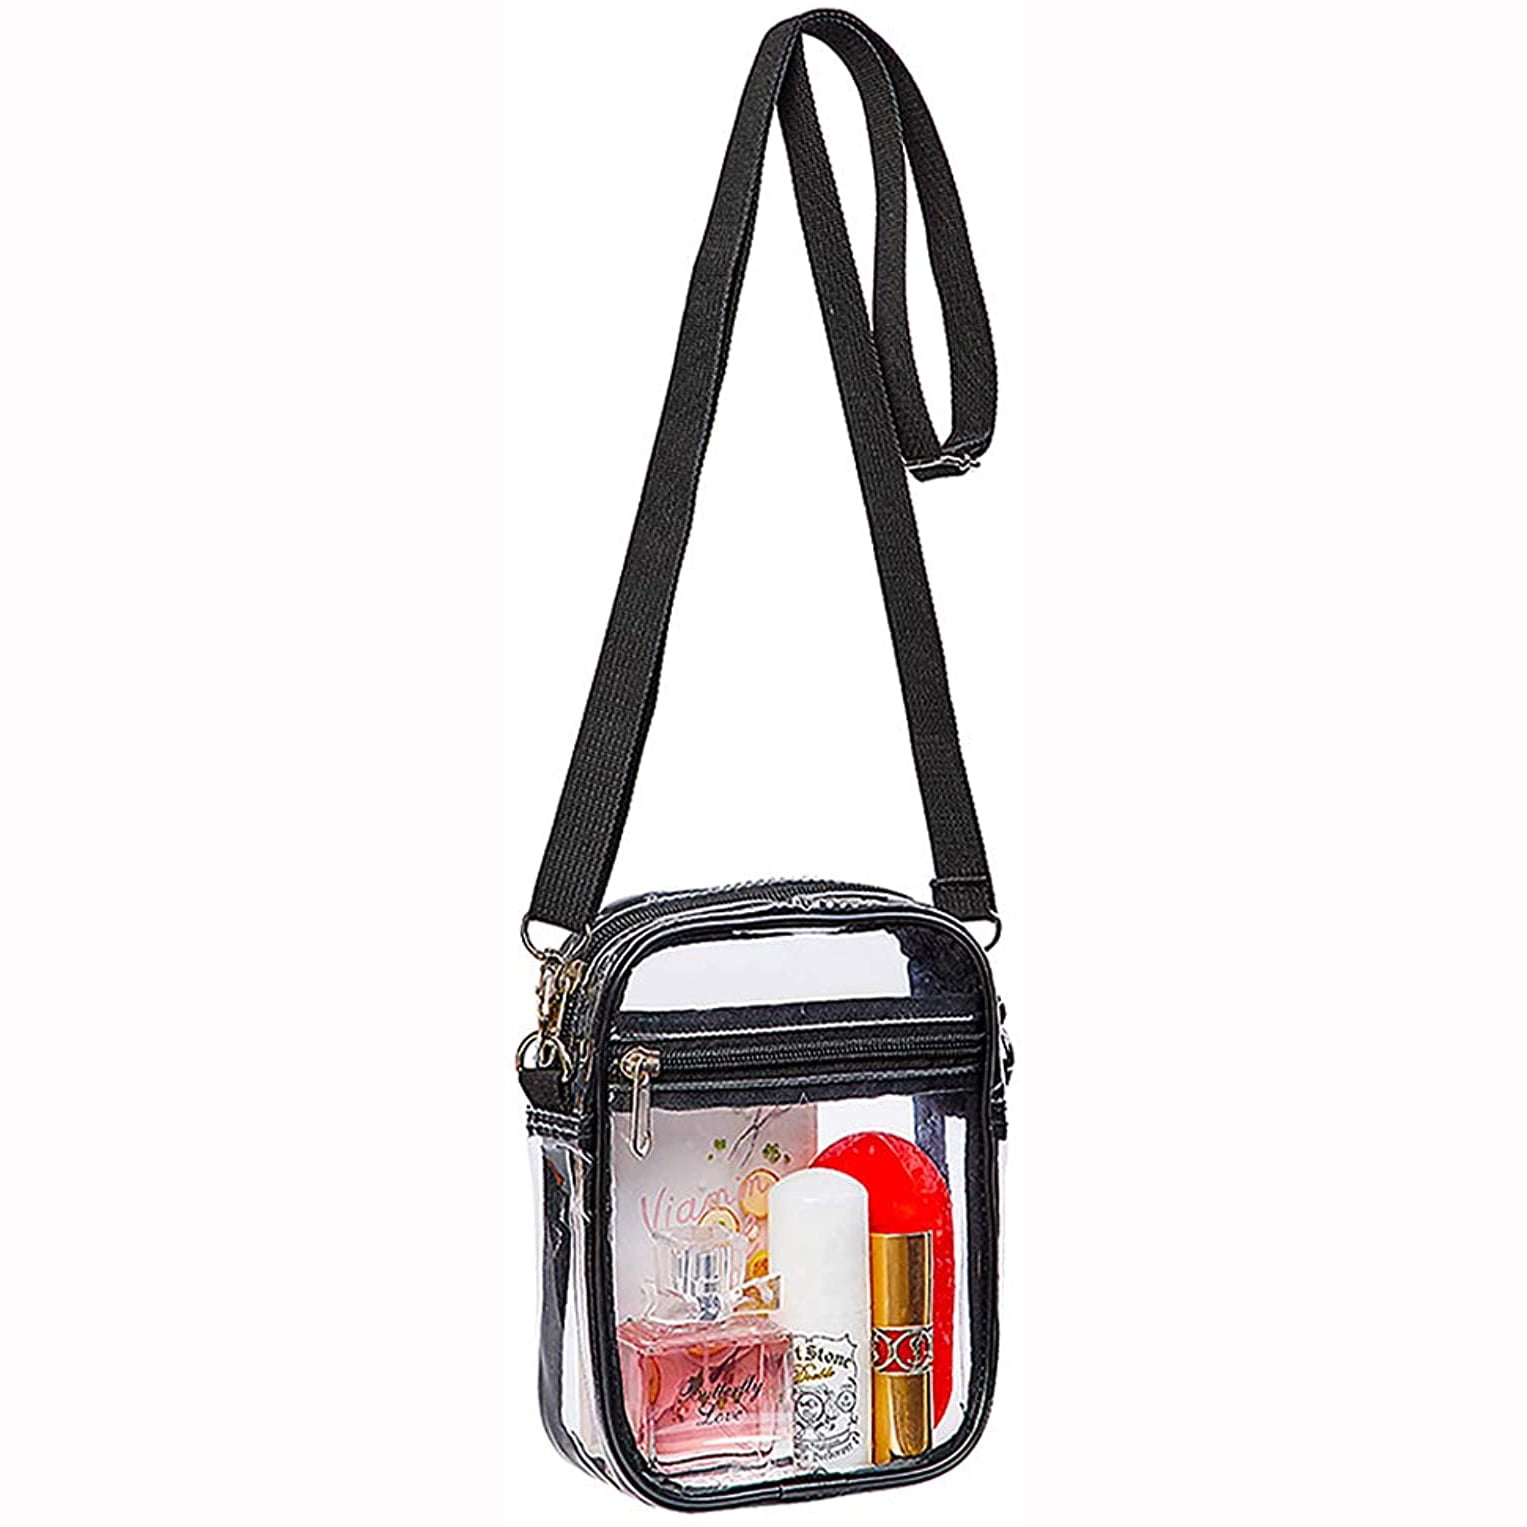 Clear Crossbody Purse Bag Stadium Approved for Concerts Sports Events 